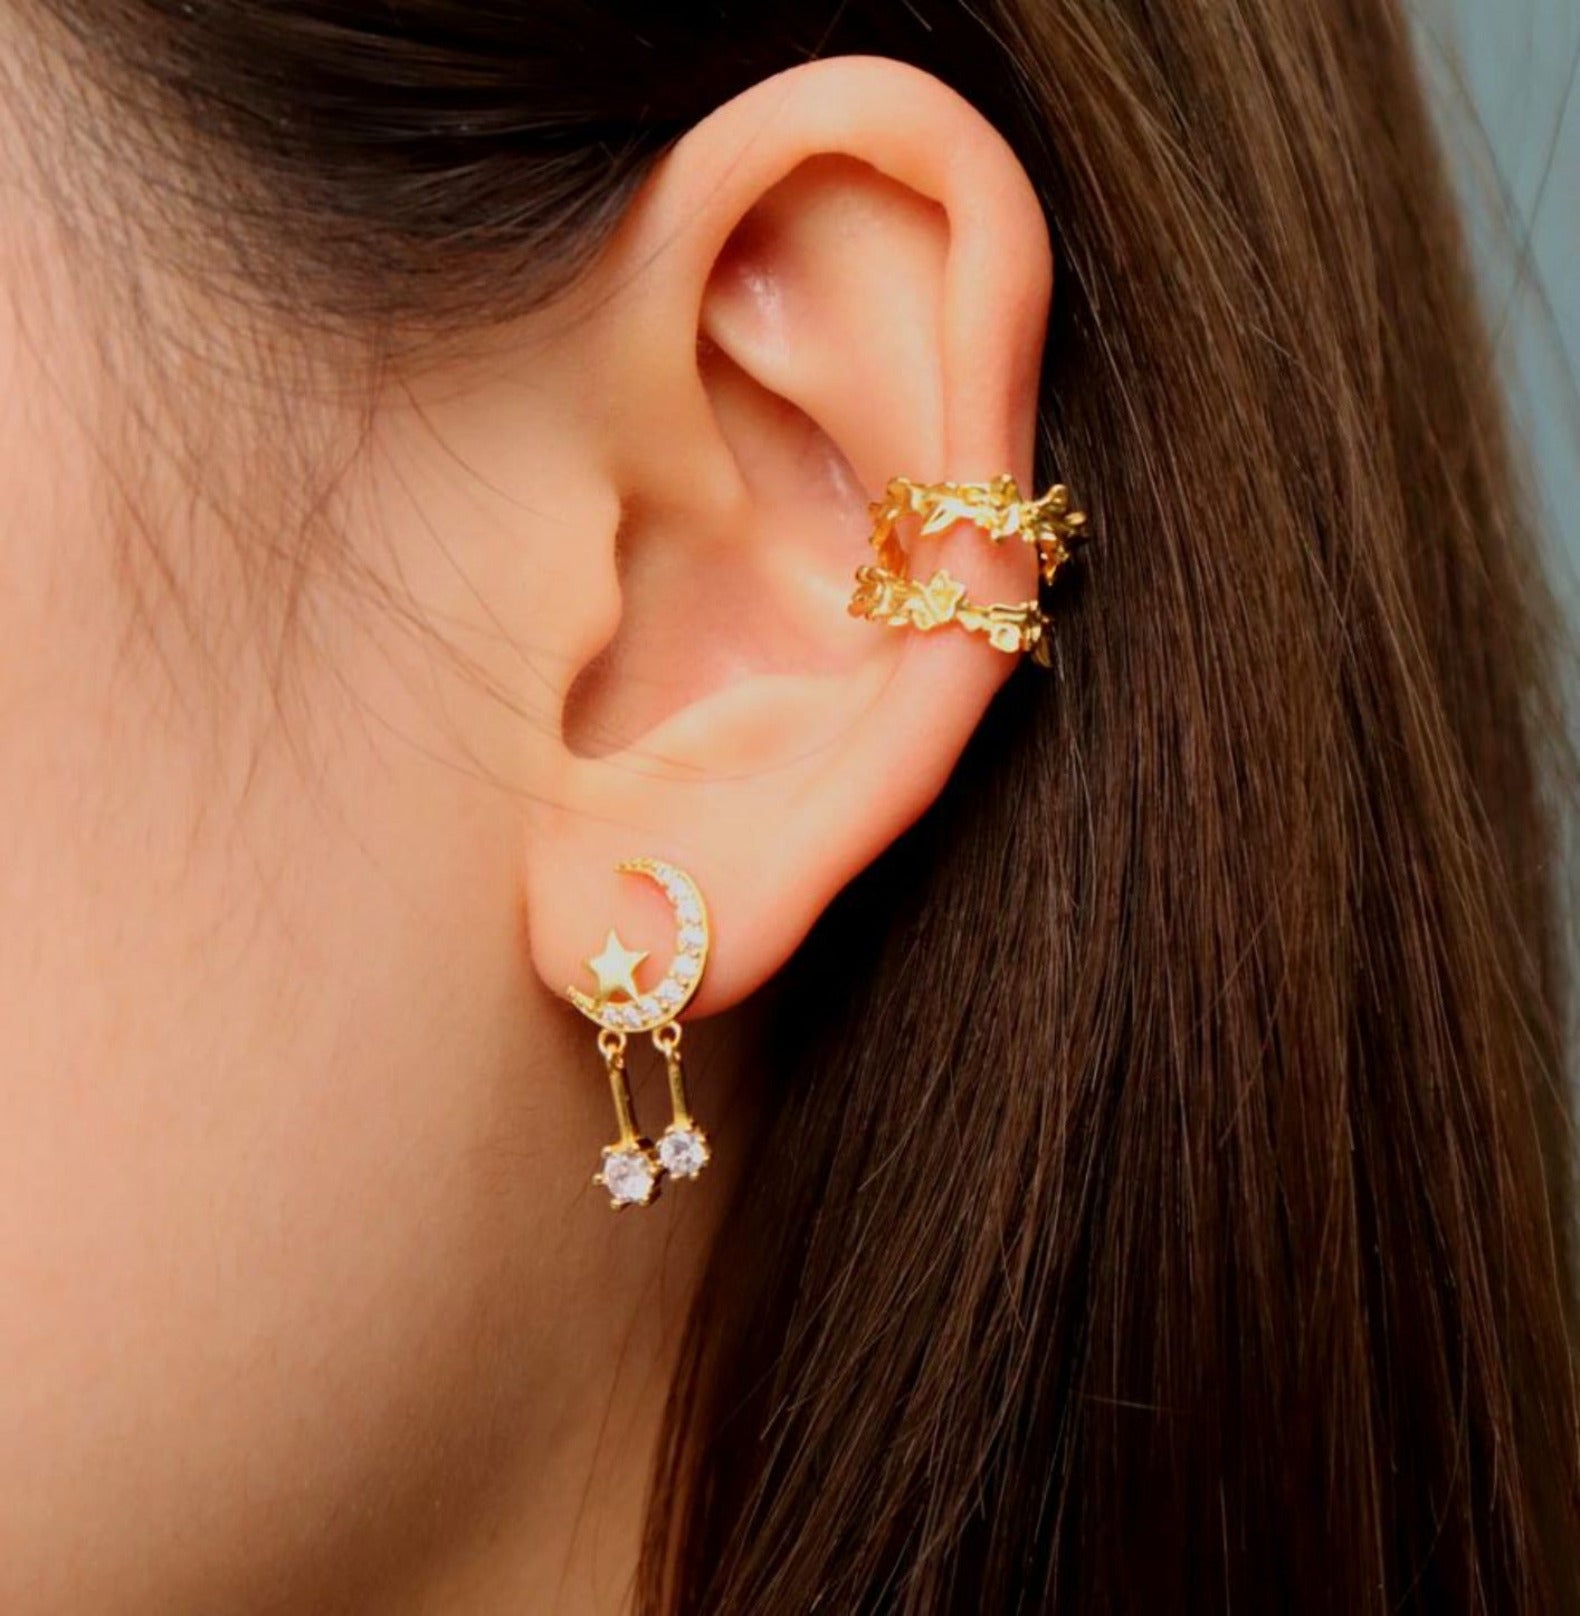 STAR SHORT EARRINGS earing Yubama Jewelry Online Store - The Elegant Designs of Gold and Silver ! 